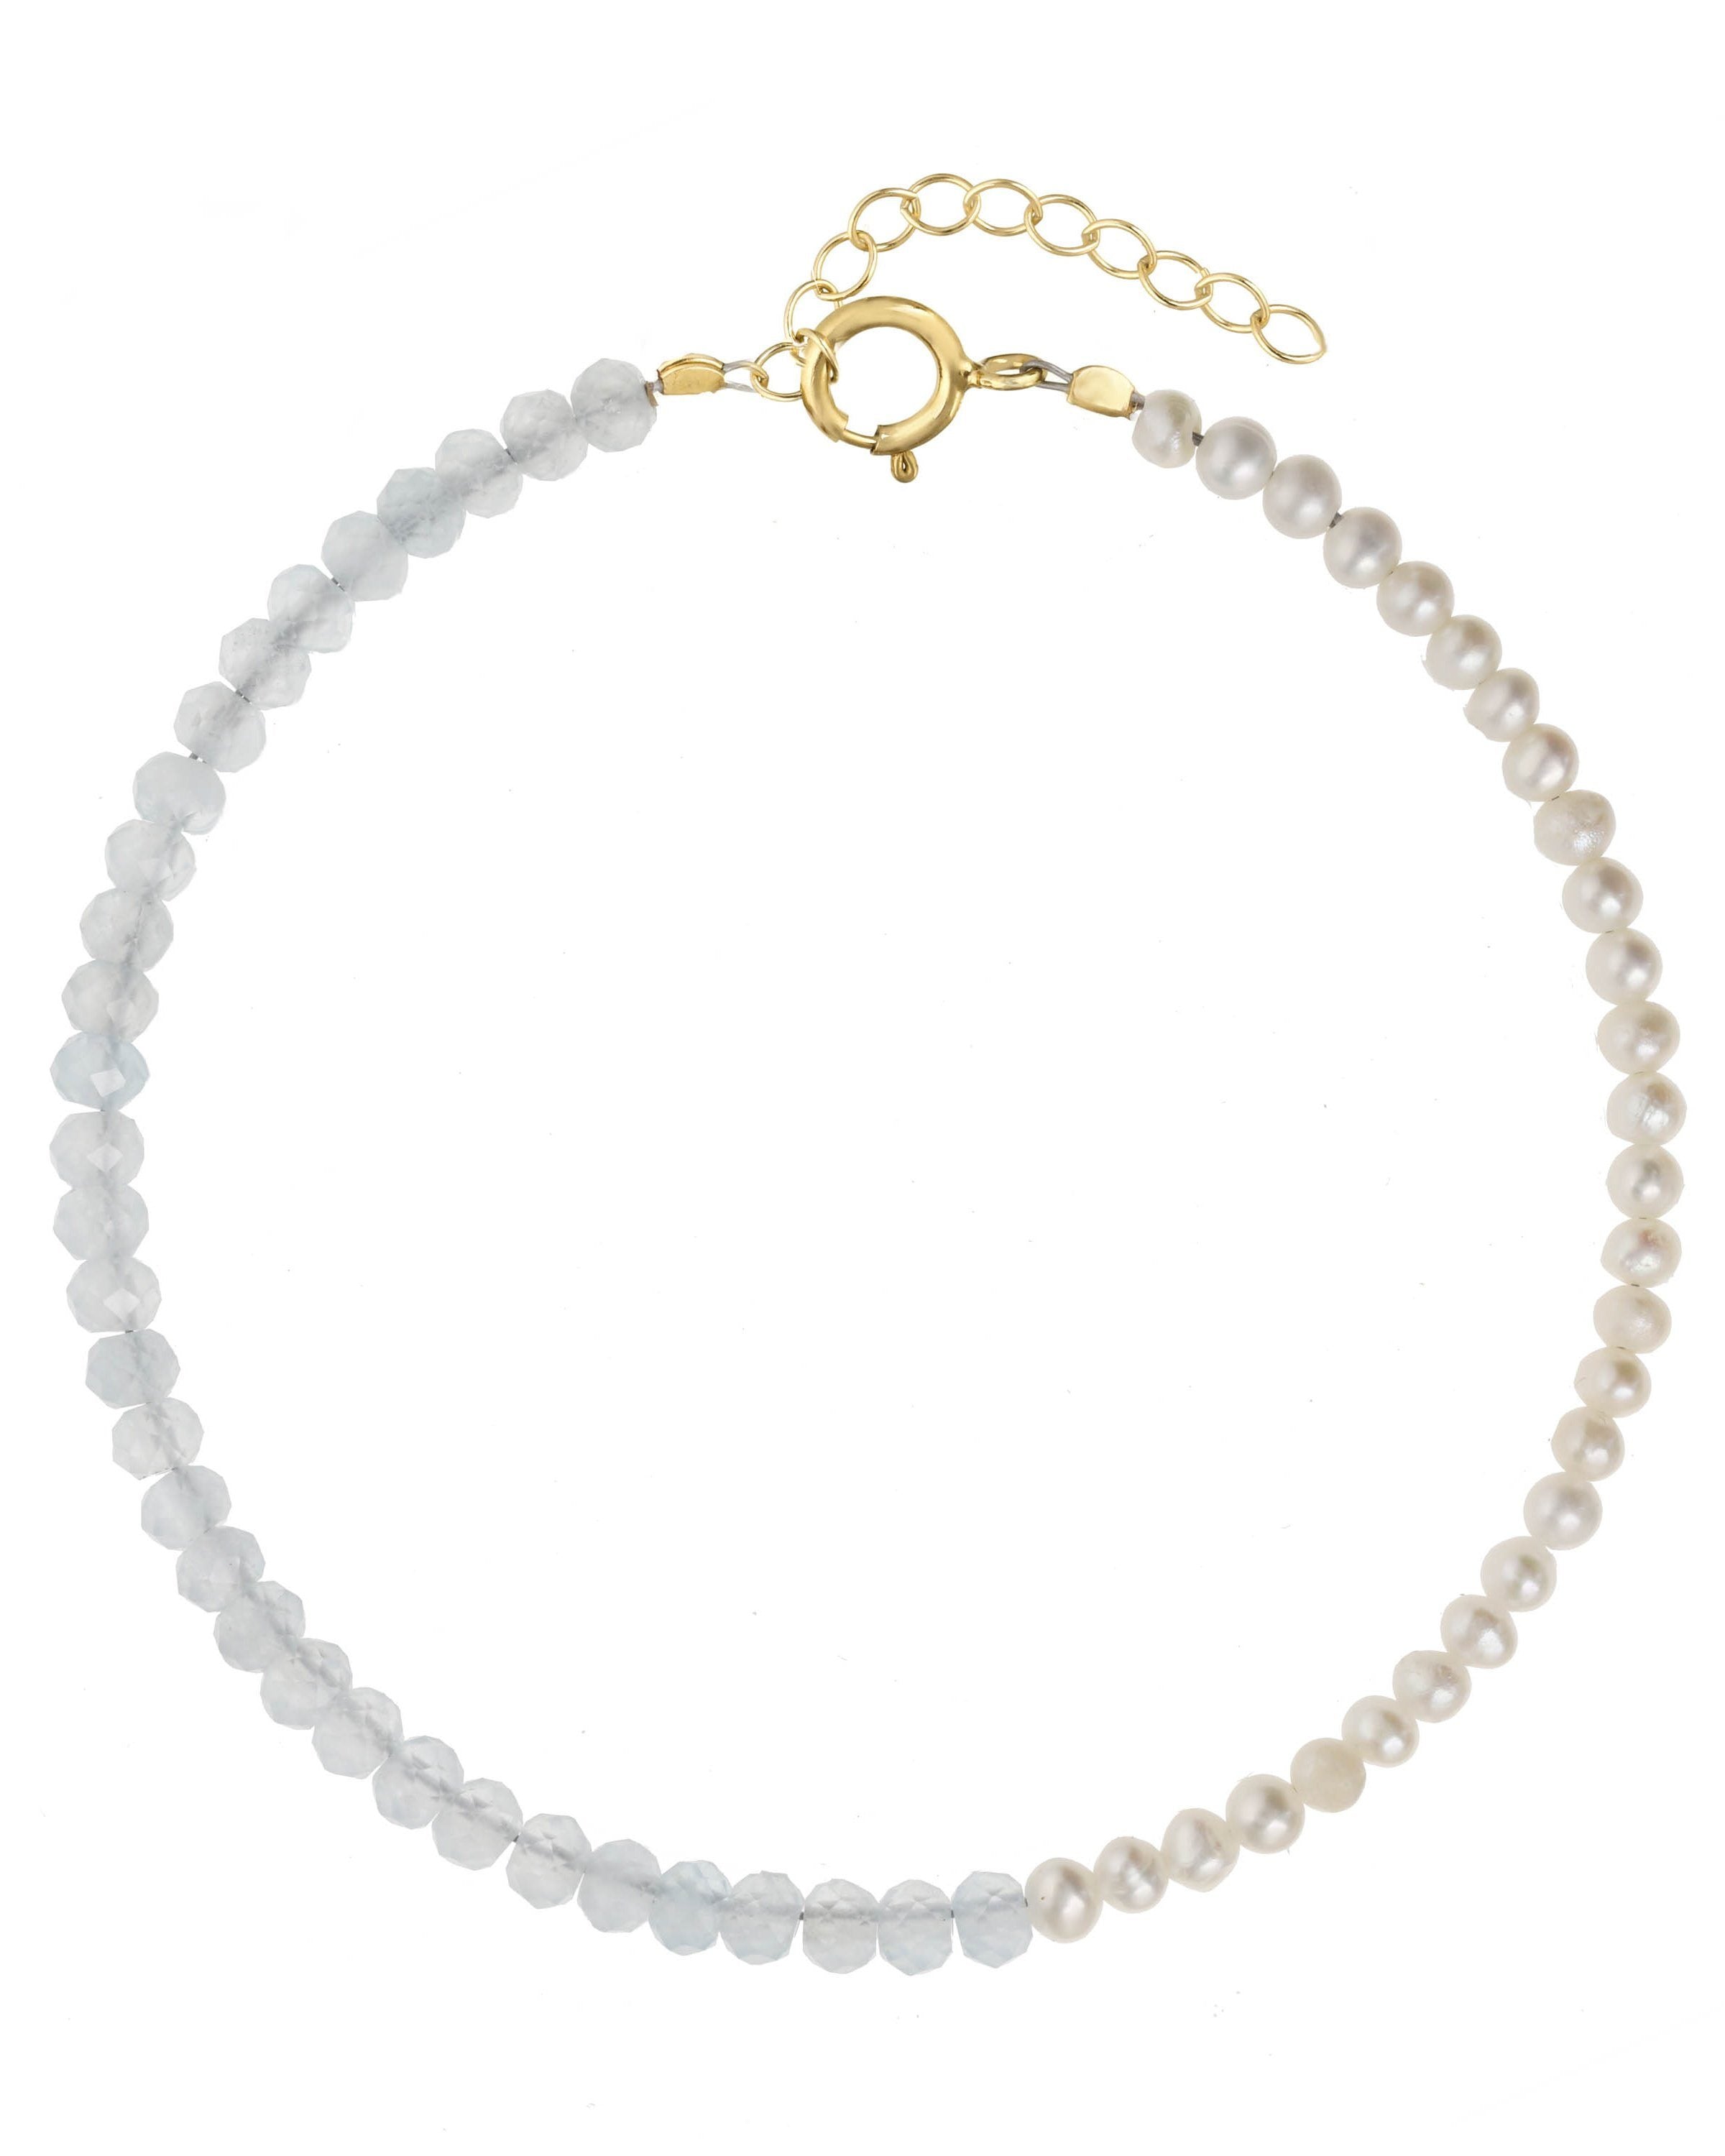 Elo Bracelet by KOZAKH. A 6 to 7 inch adjustable length bracelet, crafted in 14K Gold Filled. Half of the bracelet strand features 3.5mm Freshwater Pearls and 3.5mm Faceted Aquamarine beads on the other half.